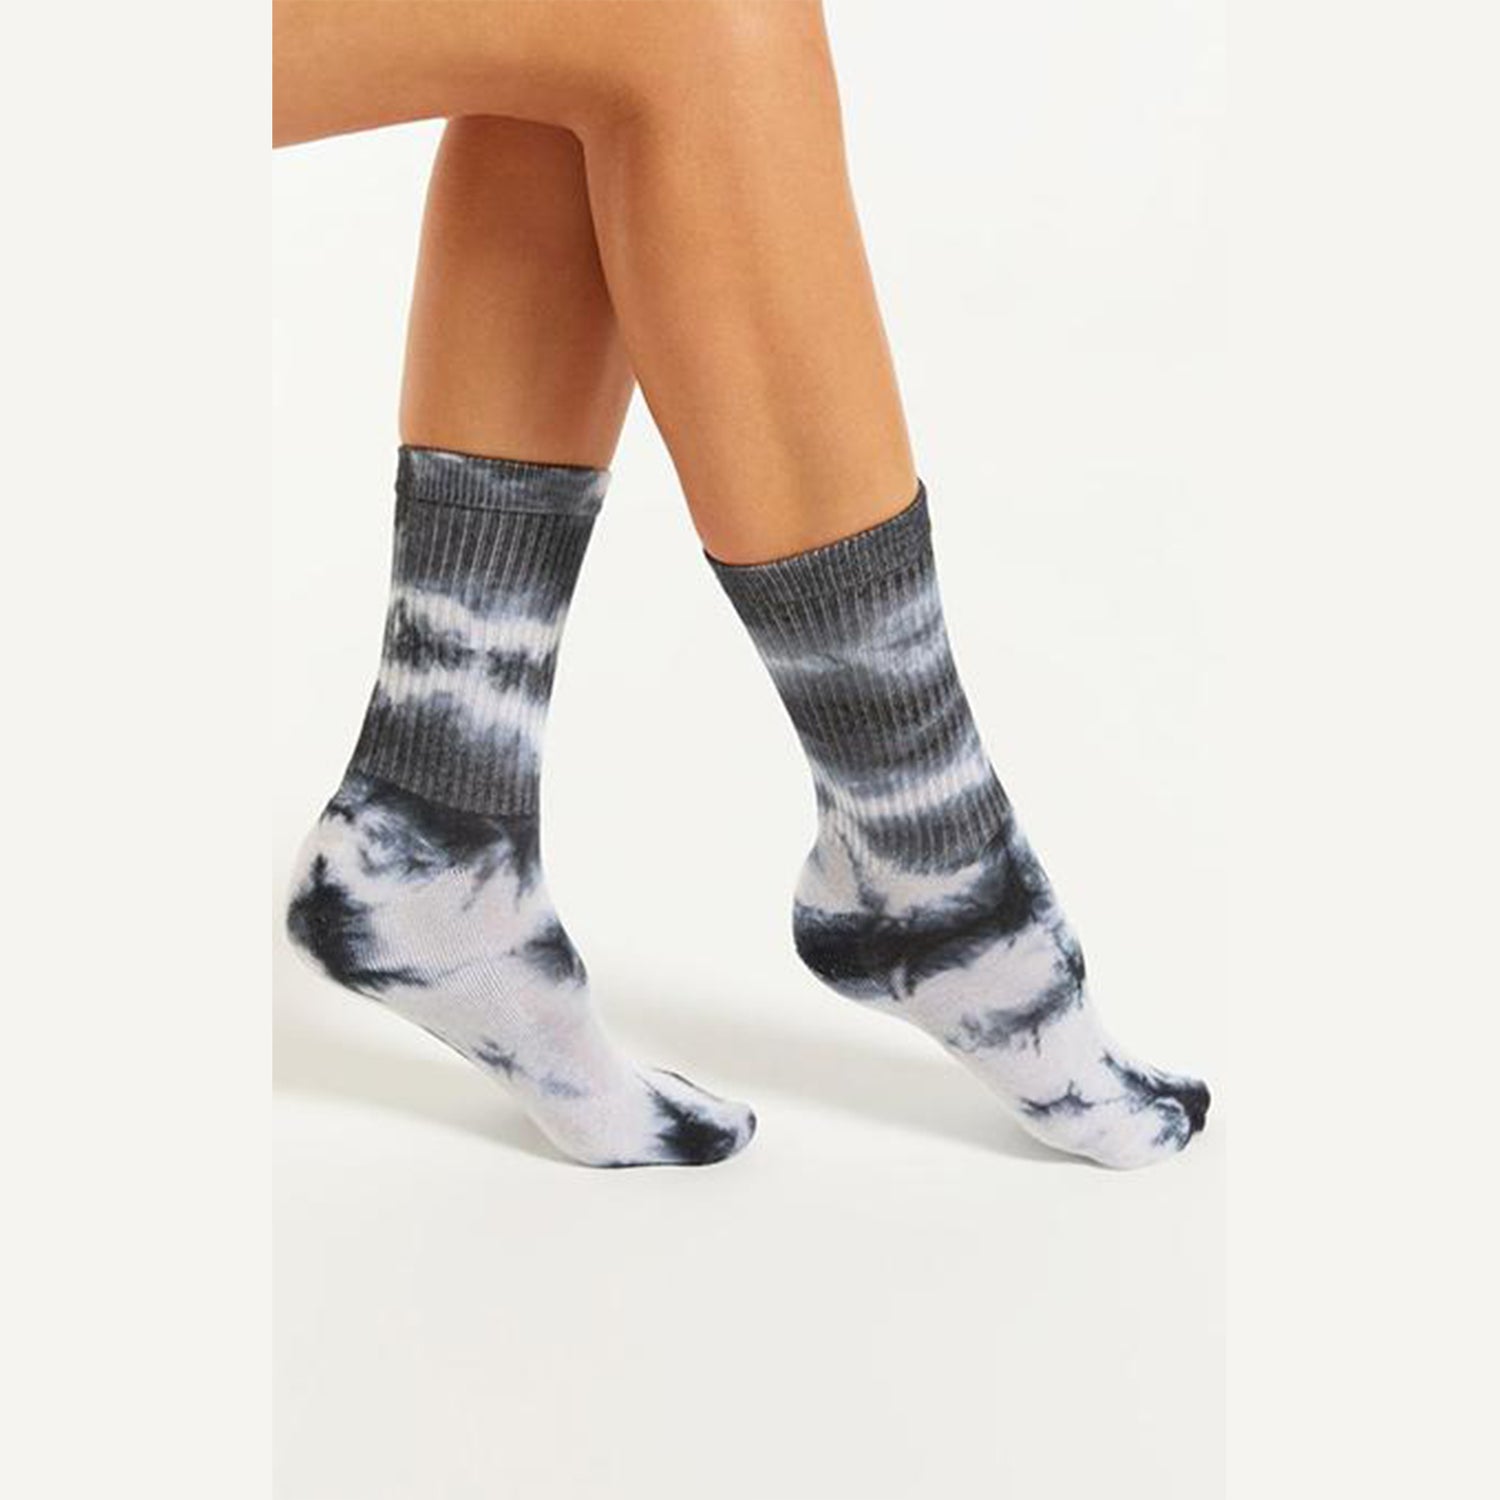 Z Supply Tie Dye Socks. These Tie Dye Socks add the perfect touch to any cozy look and can be worn in and out of the house. Wear them with your favorite lounge set for a colorful, fun look you'll wear all season.